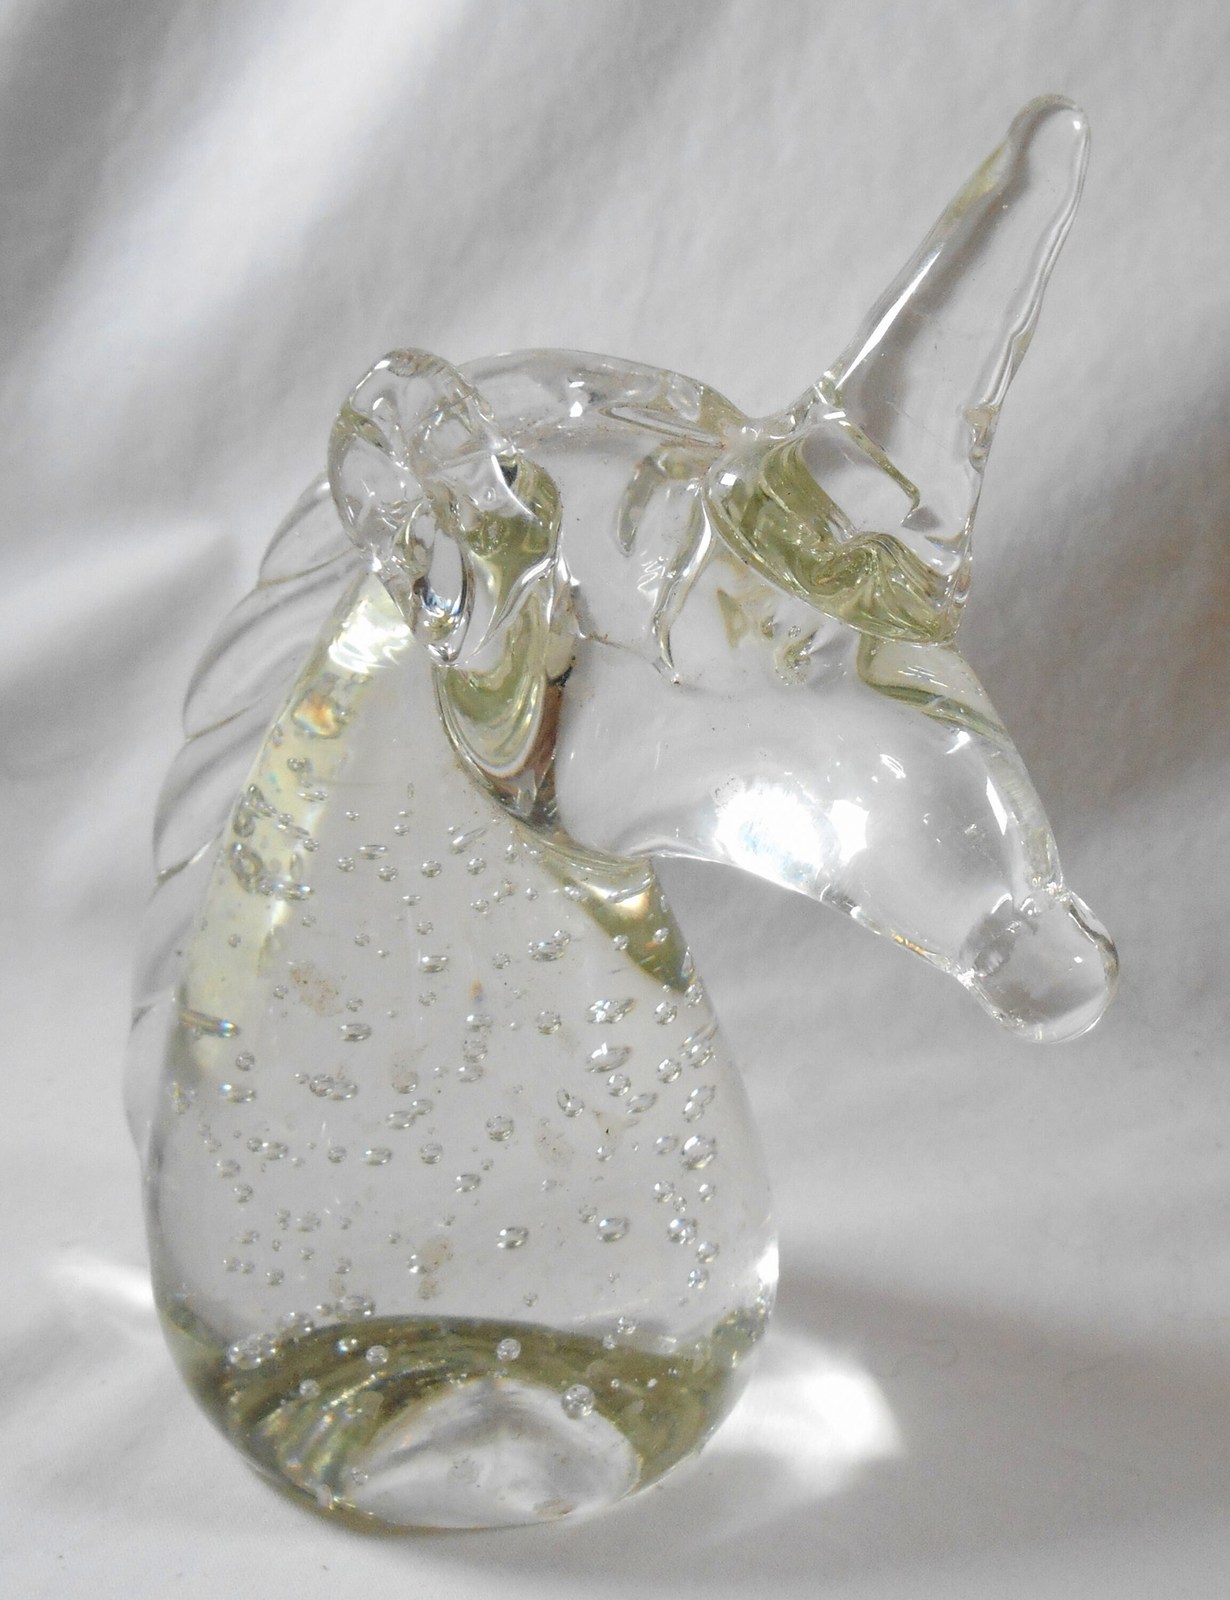 Primary image for Vintage Unicorn Figurine Controlled Bubble Art Glass Paperweight, 5-1/2" x 4-1/4